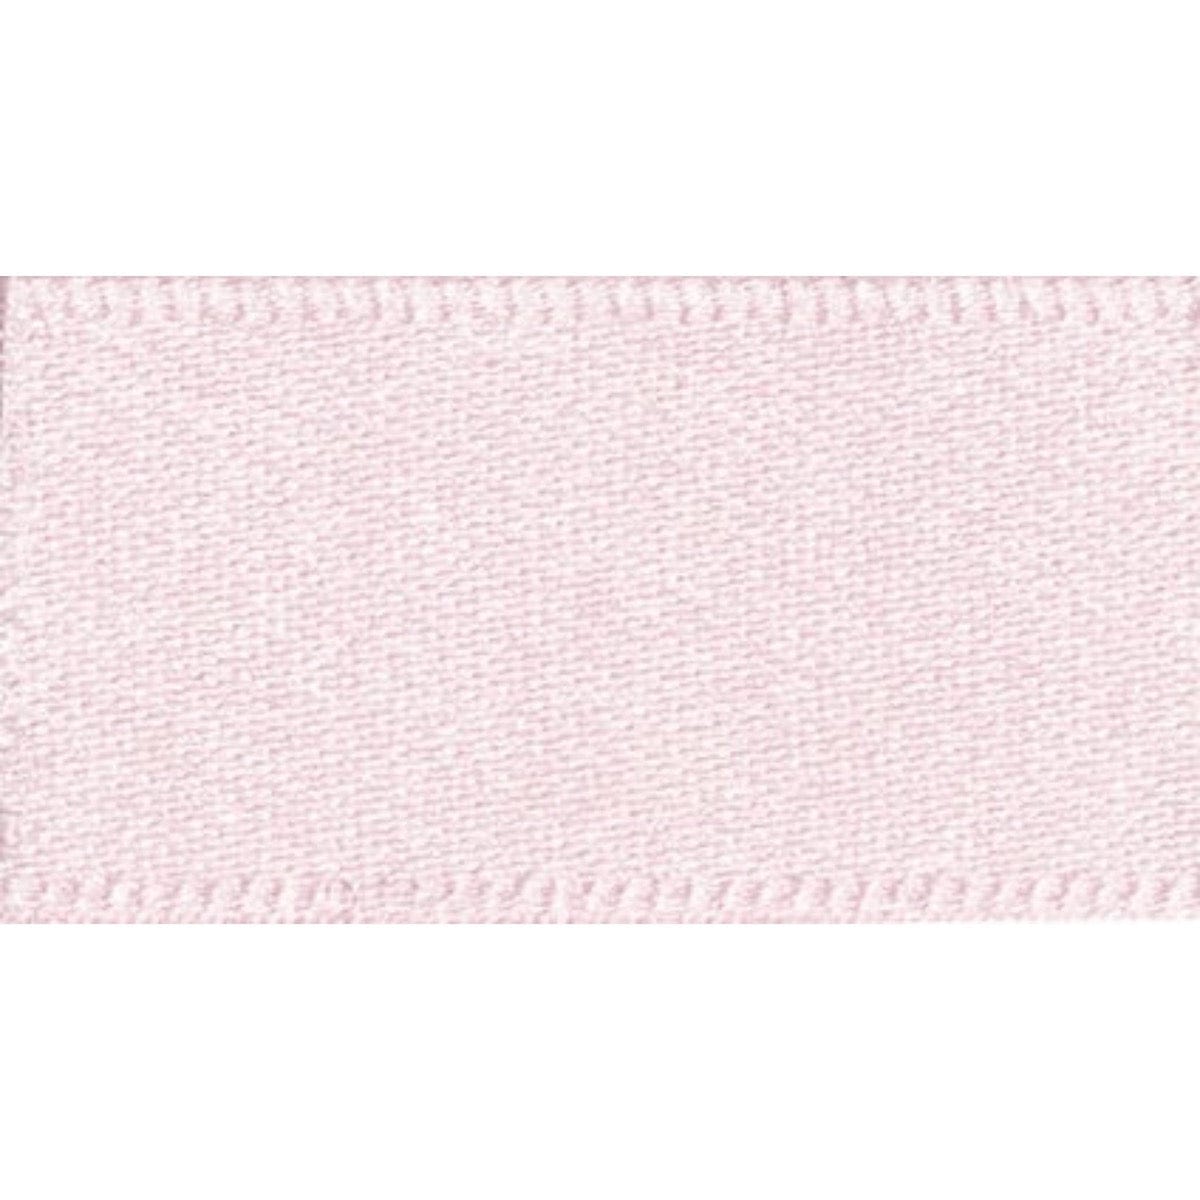 Double Faced Satin Ribbon Pale Pink: 7mm wide. Price per metre.